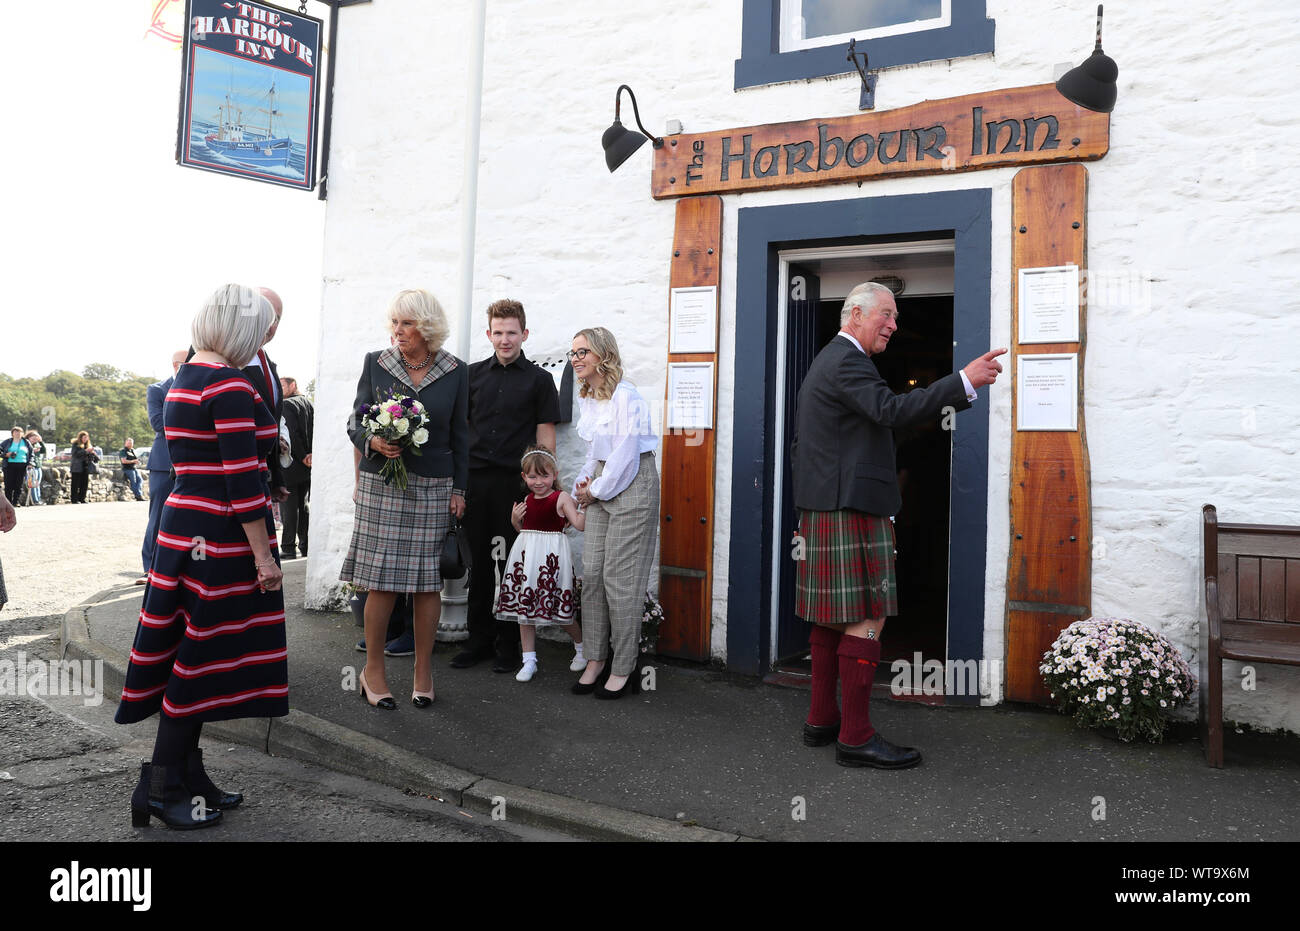 The Prince of Wales and Duchess of Cornwall, known as the Duke and Duchess of Rothesay when in Scotland, pay a visit to the Harbour Inn during a visit to the coastal village of Garlieston, Wigtownshire, where the port played an important role in D-Day preparations in 1944, in the testing of the Mulberry Harbours. PA Photo. Picture date: Wednesday September 11, 2019. See PA story ROYAL Charles. Photo credit should read: Andrew Milligan/PA Wire Stock Photo